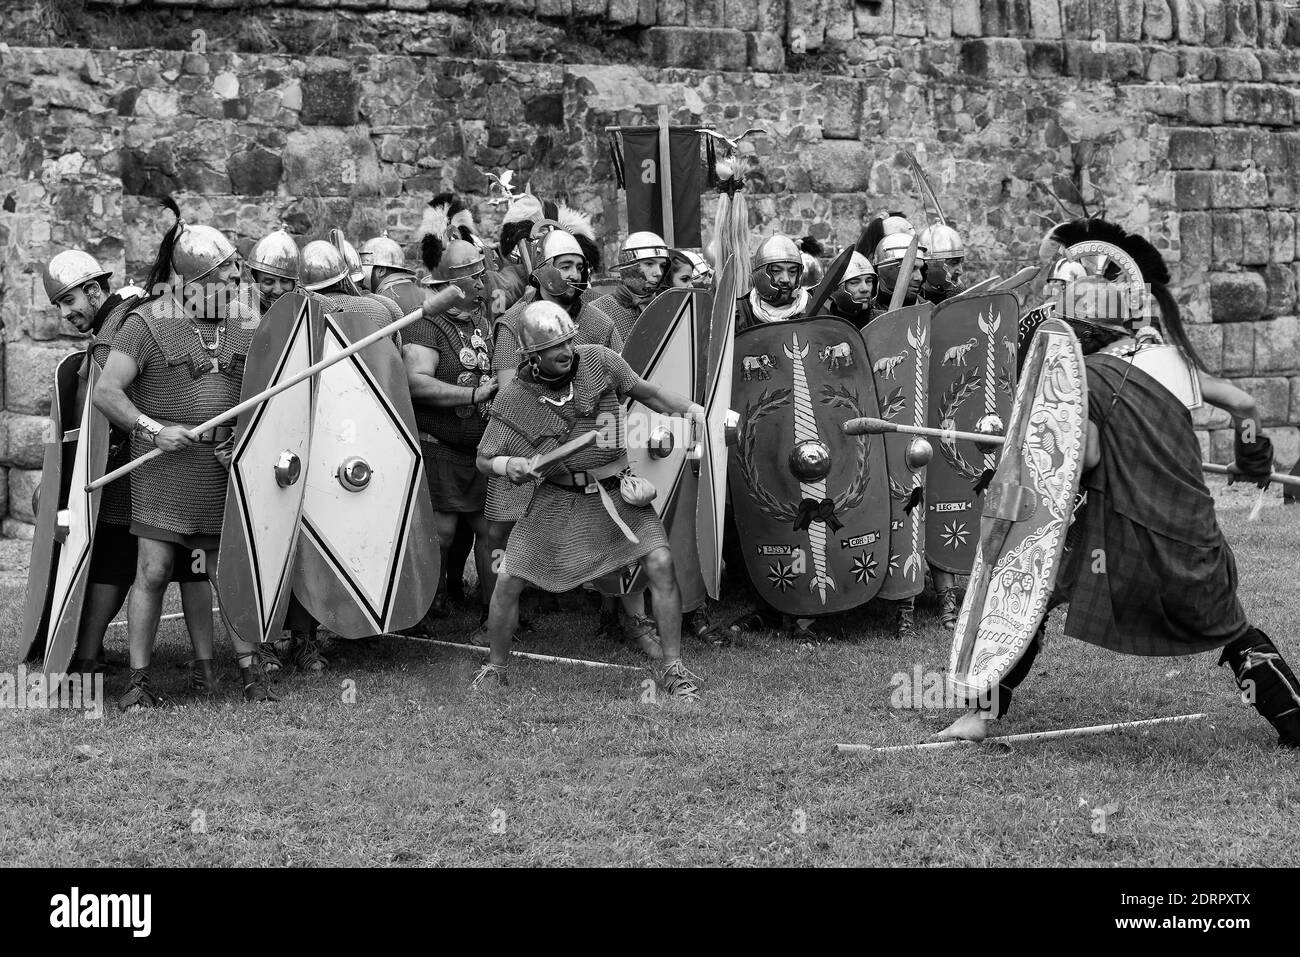 MERIDA, SPAIN - Sep 27, 2014: Several people dressed in the costume of ancient Celtic warrior in first century, participates in historical reenactment Stock Photo